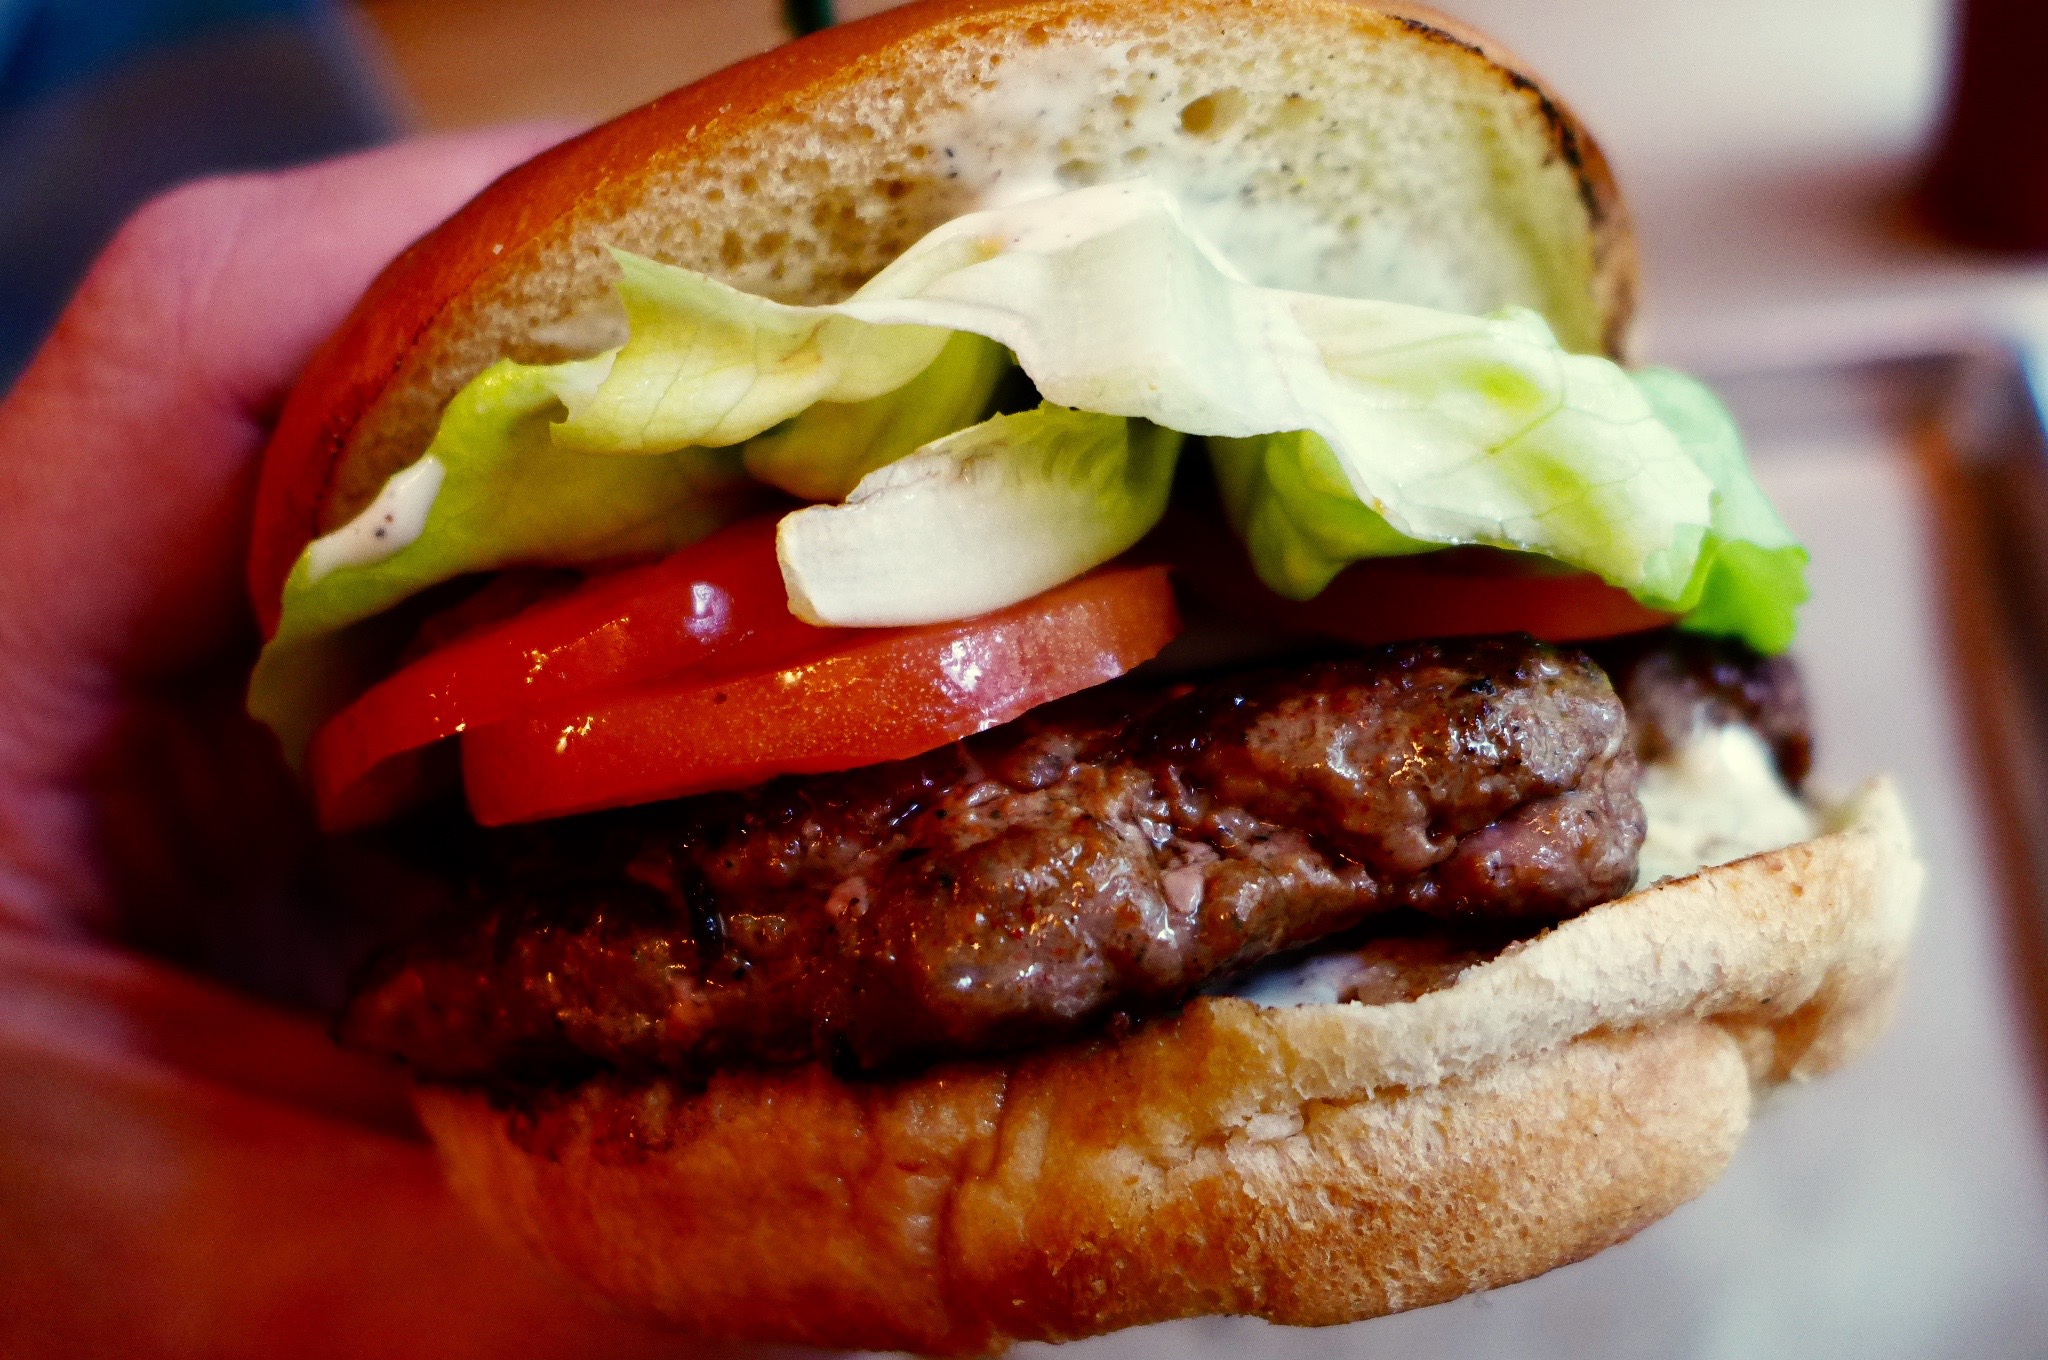 A close-up picture of a burger with tomato and iceberg lettuce.